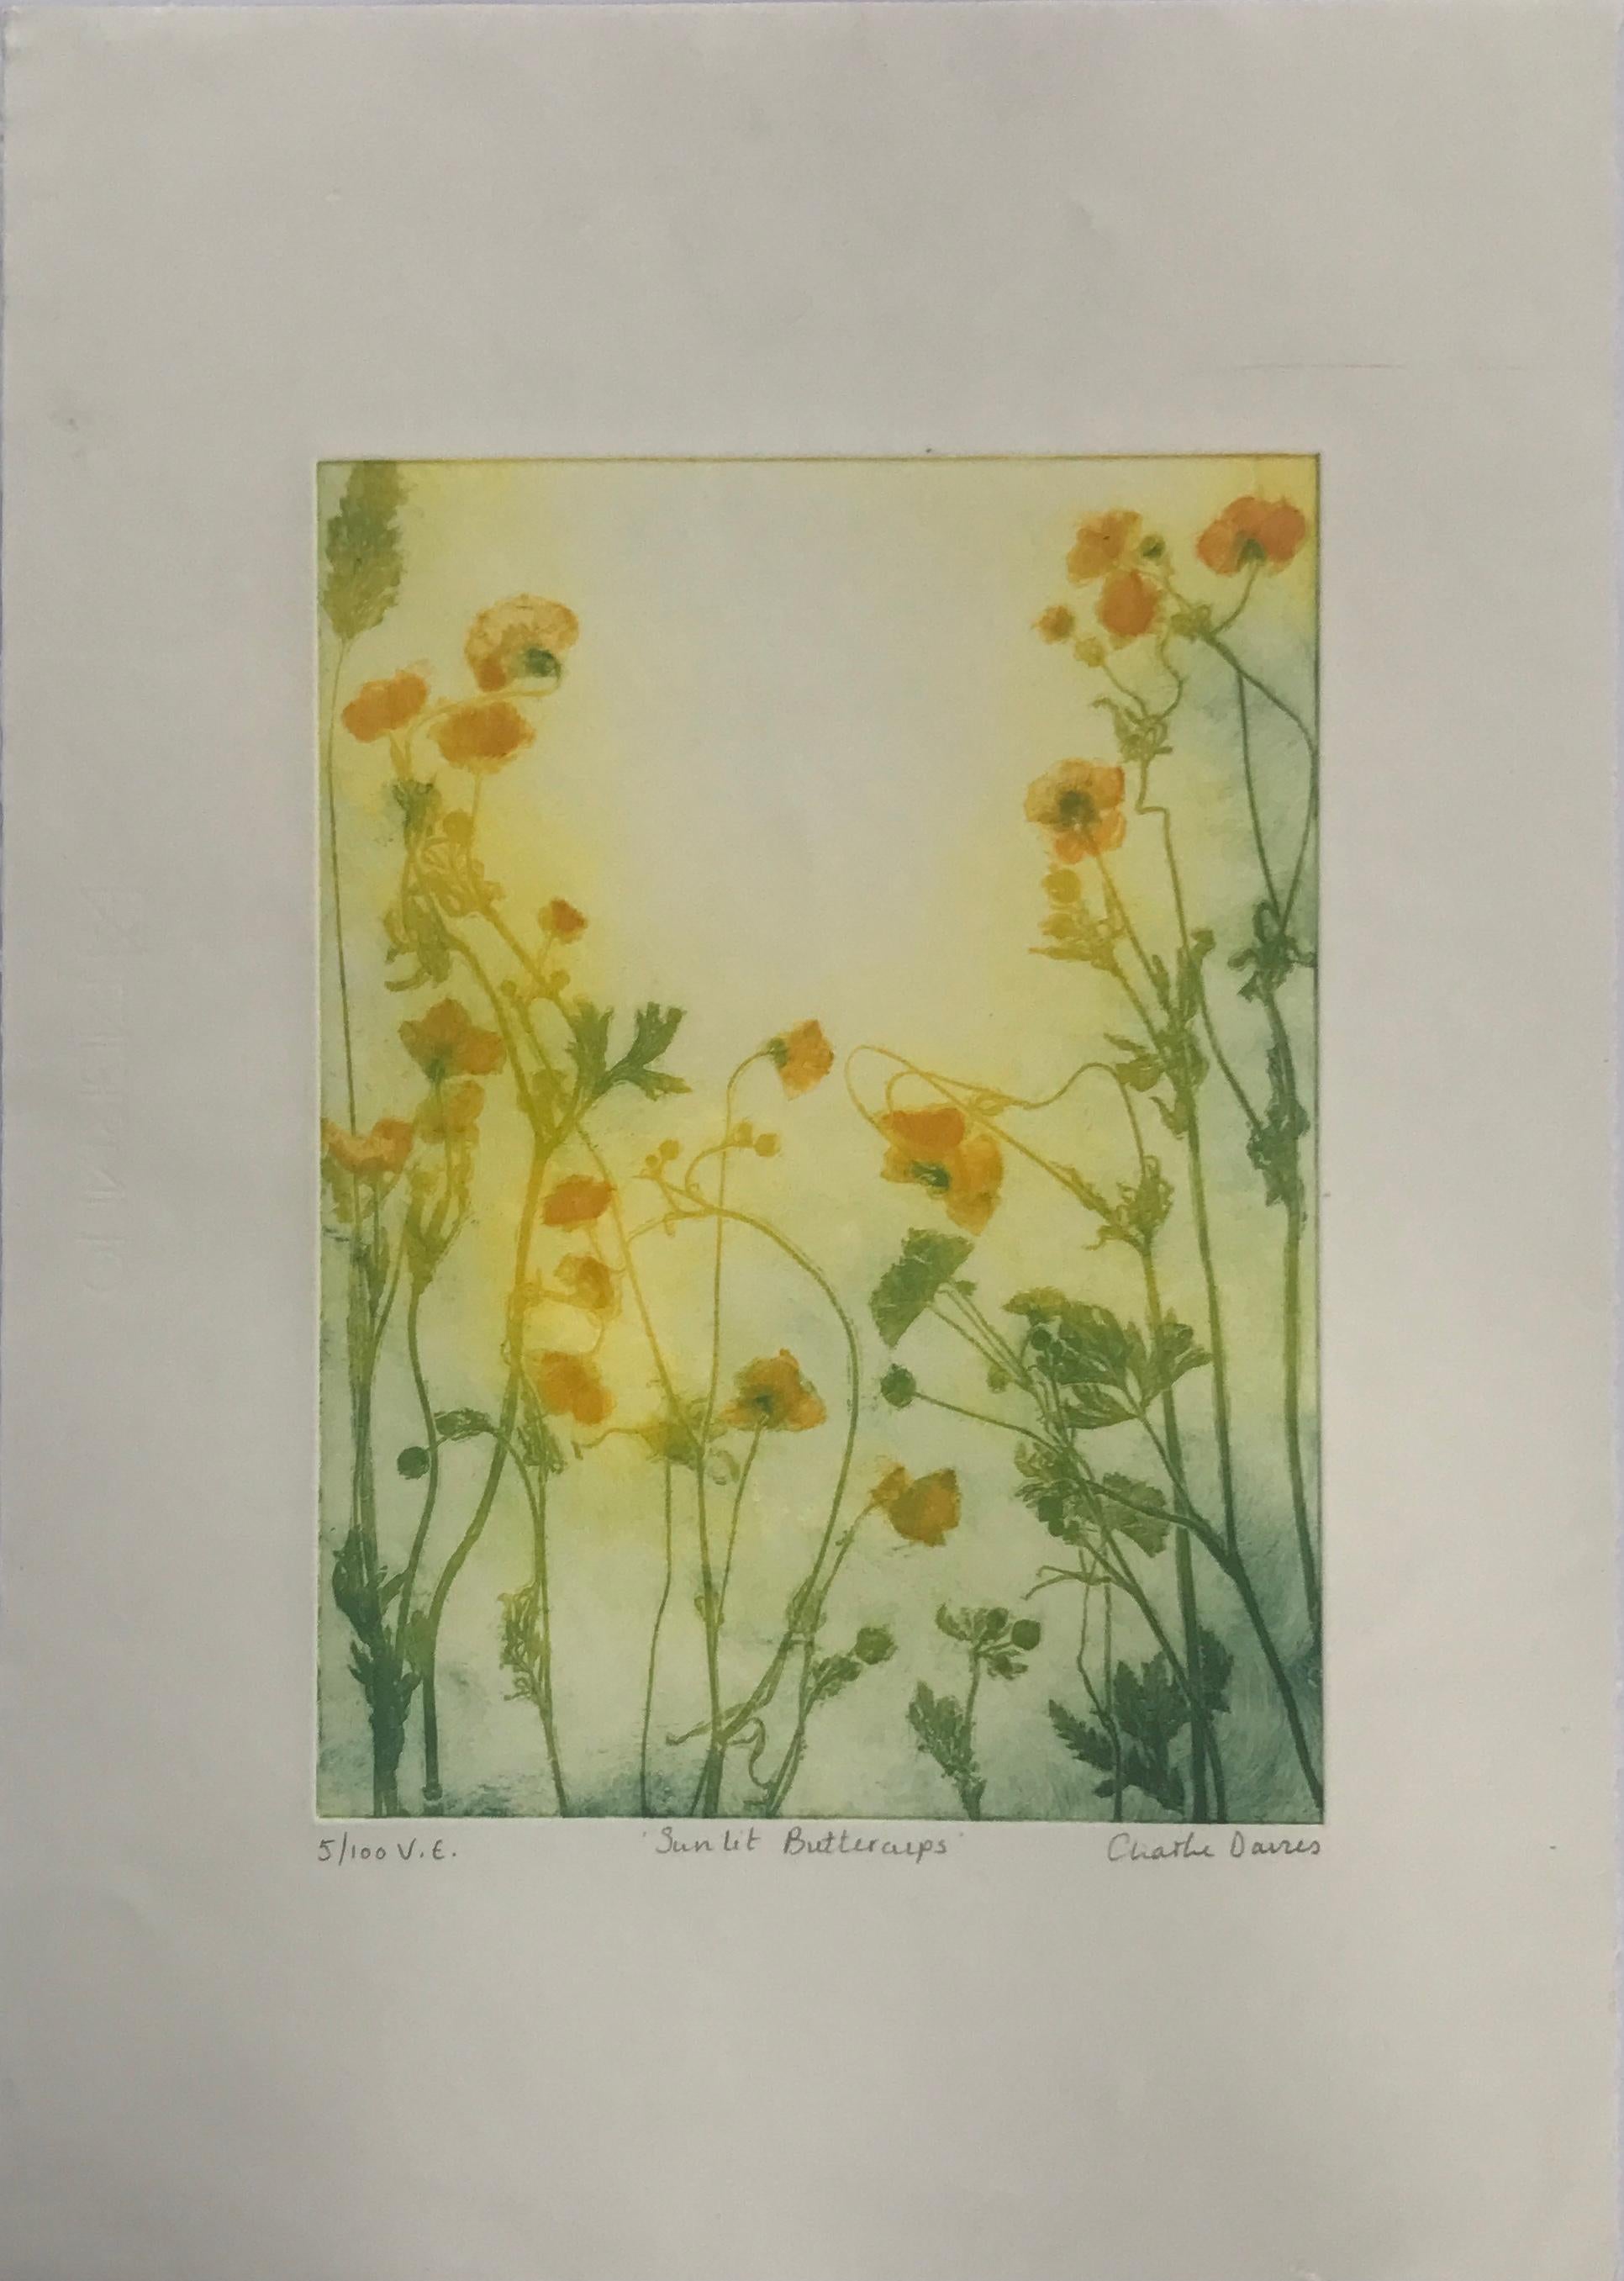 Sunlit Buttercups by Charlie Davies is a limited edition print made using real flowers and fauna from nature to make the etching plate. Part of the printmaking process that Charlie has so tastefully mastered produces slight variations when rubbing